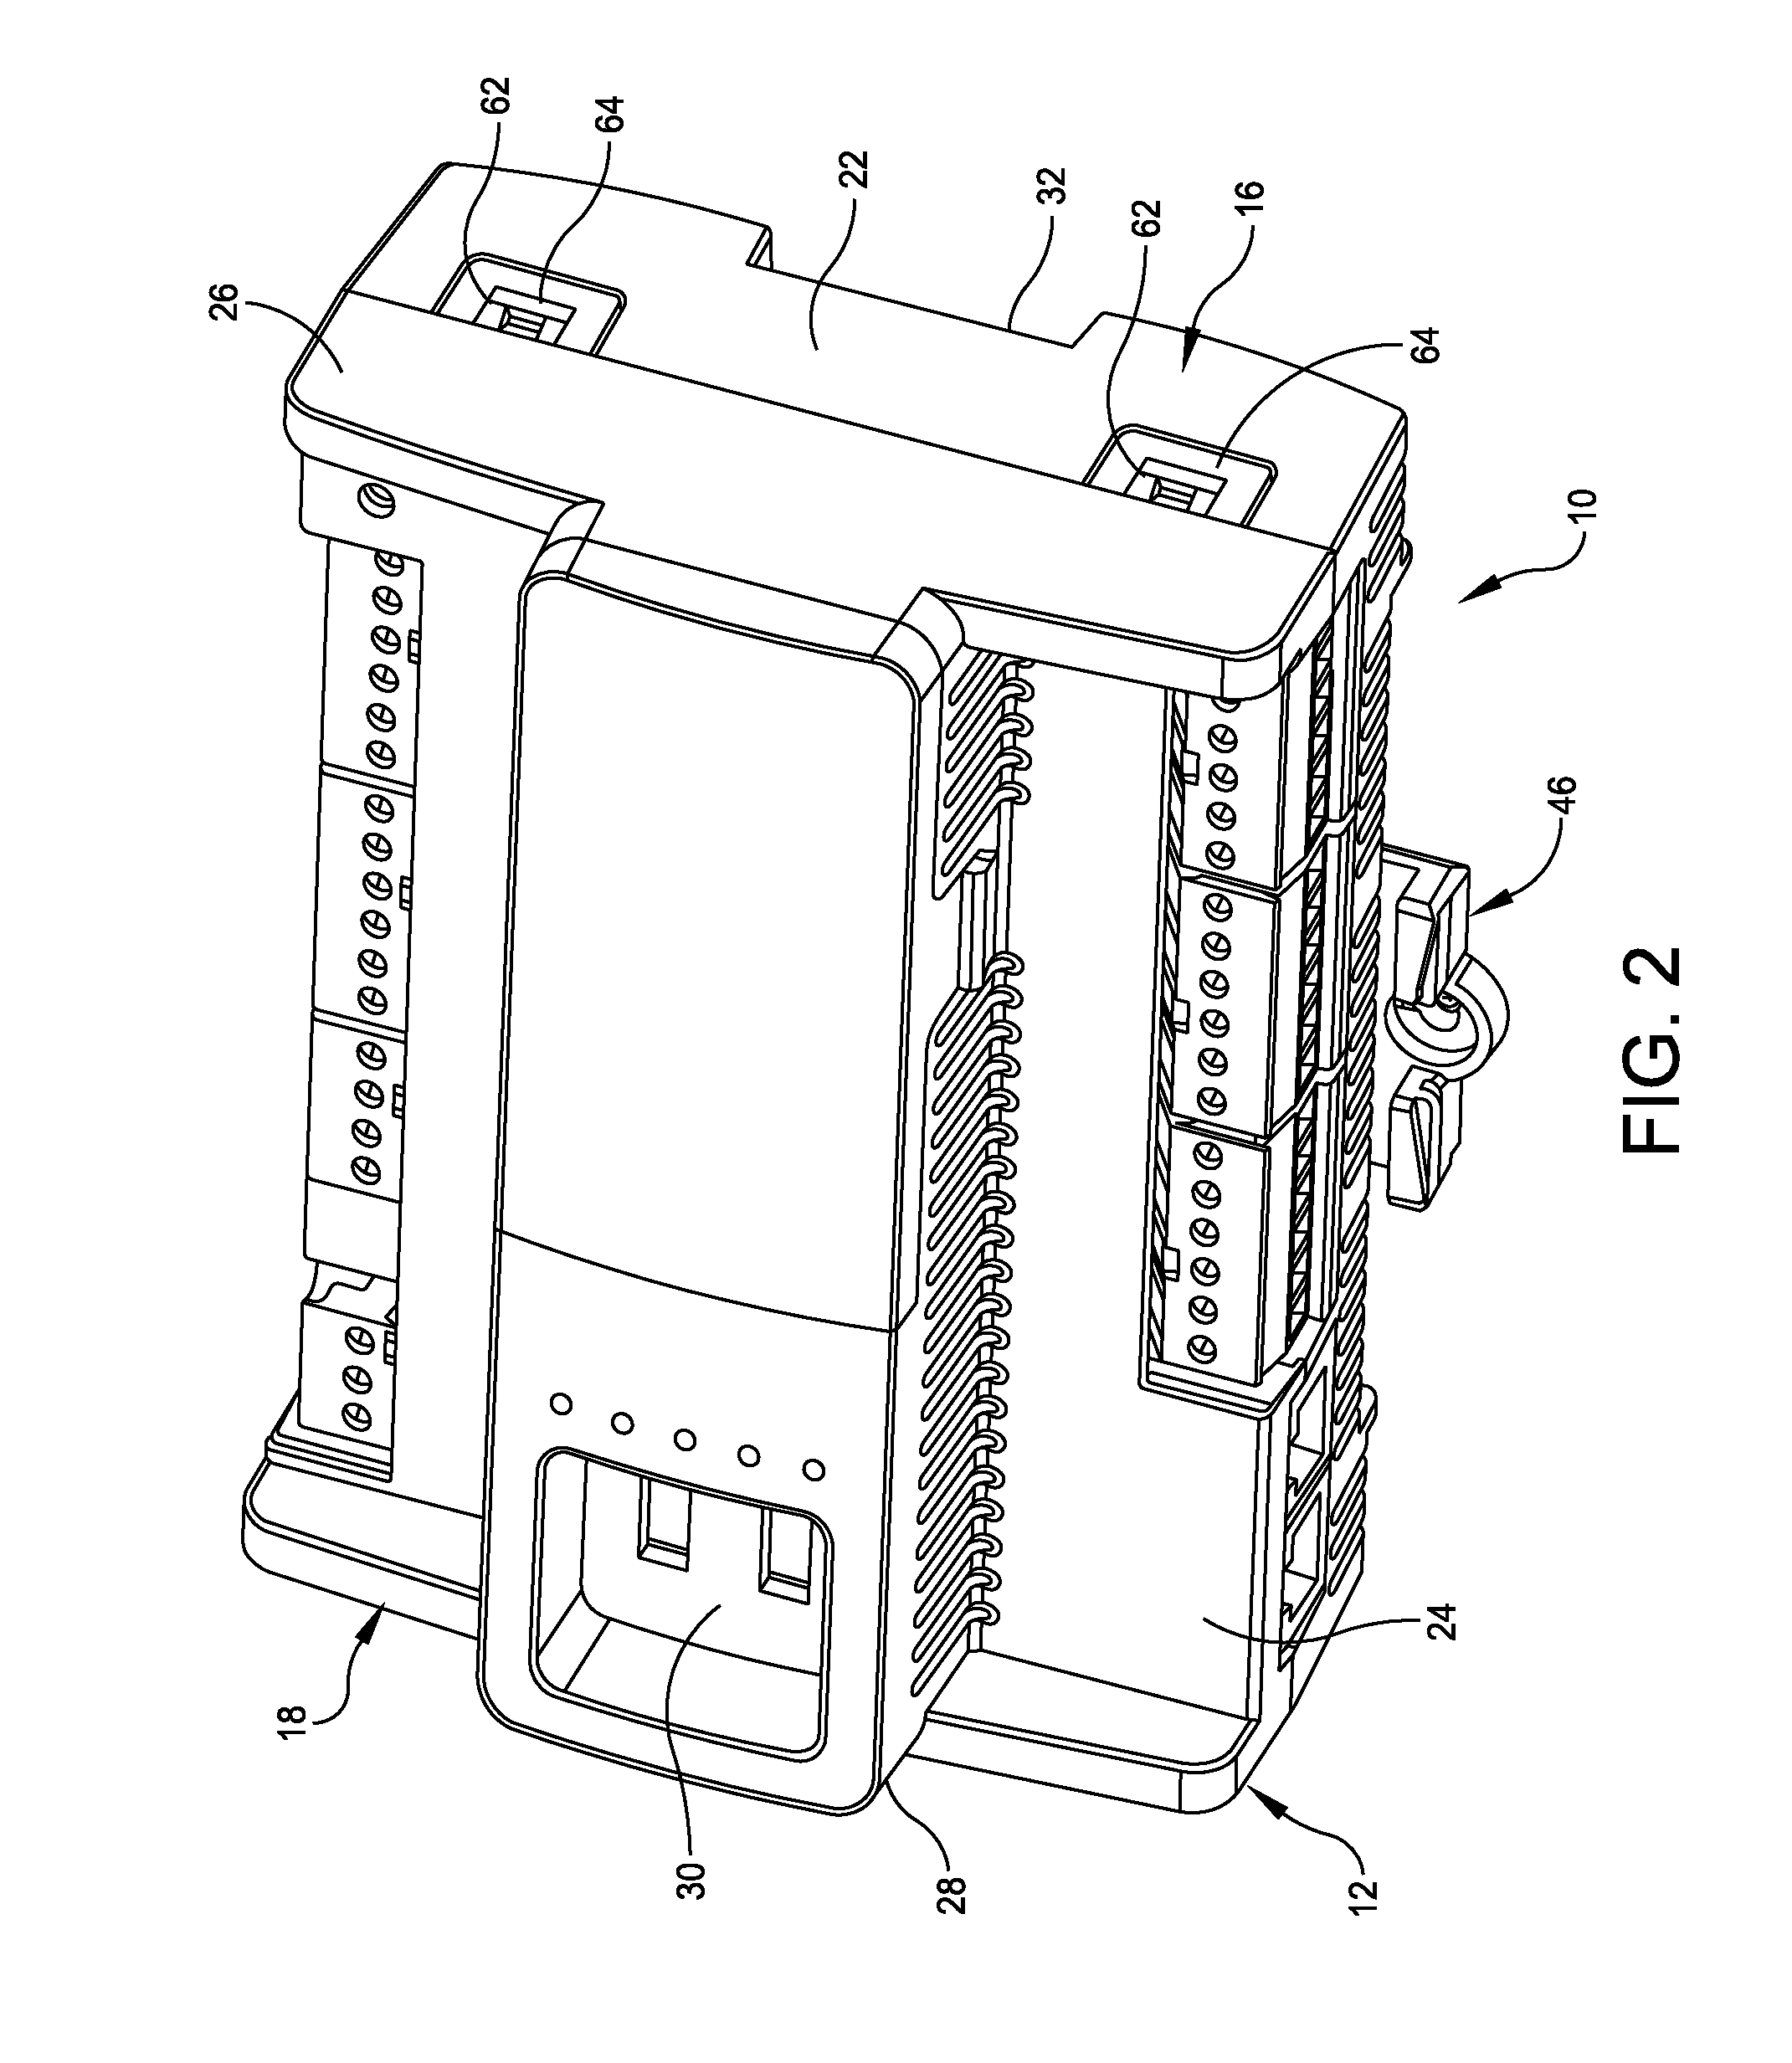 DIN rail mounted enclosure assembly and method of use